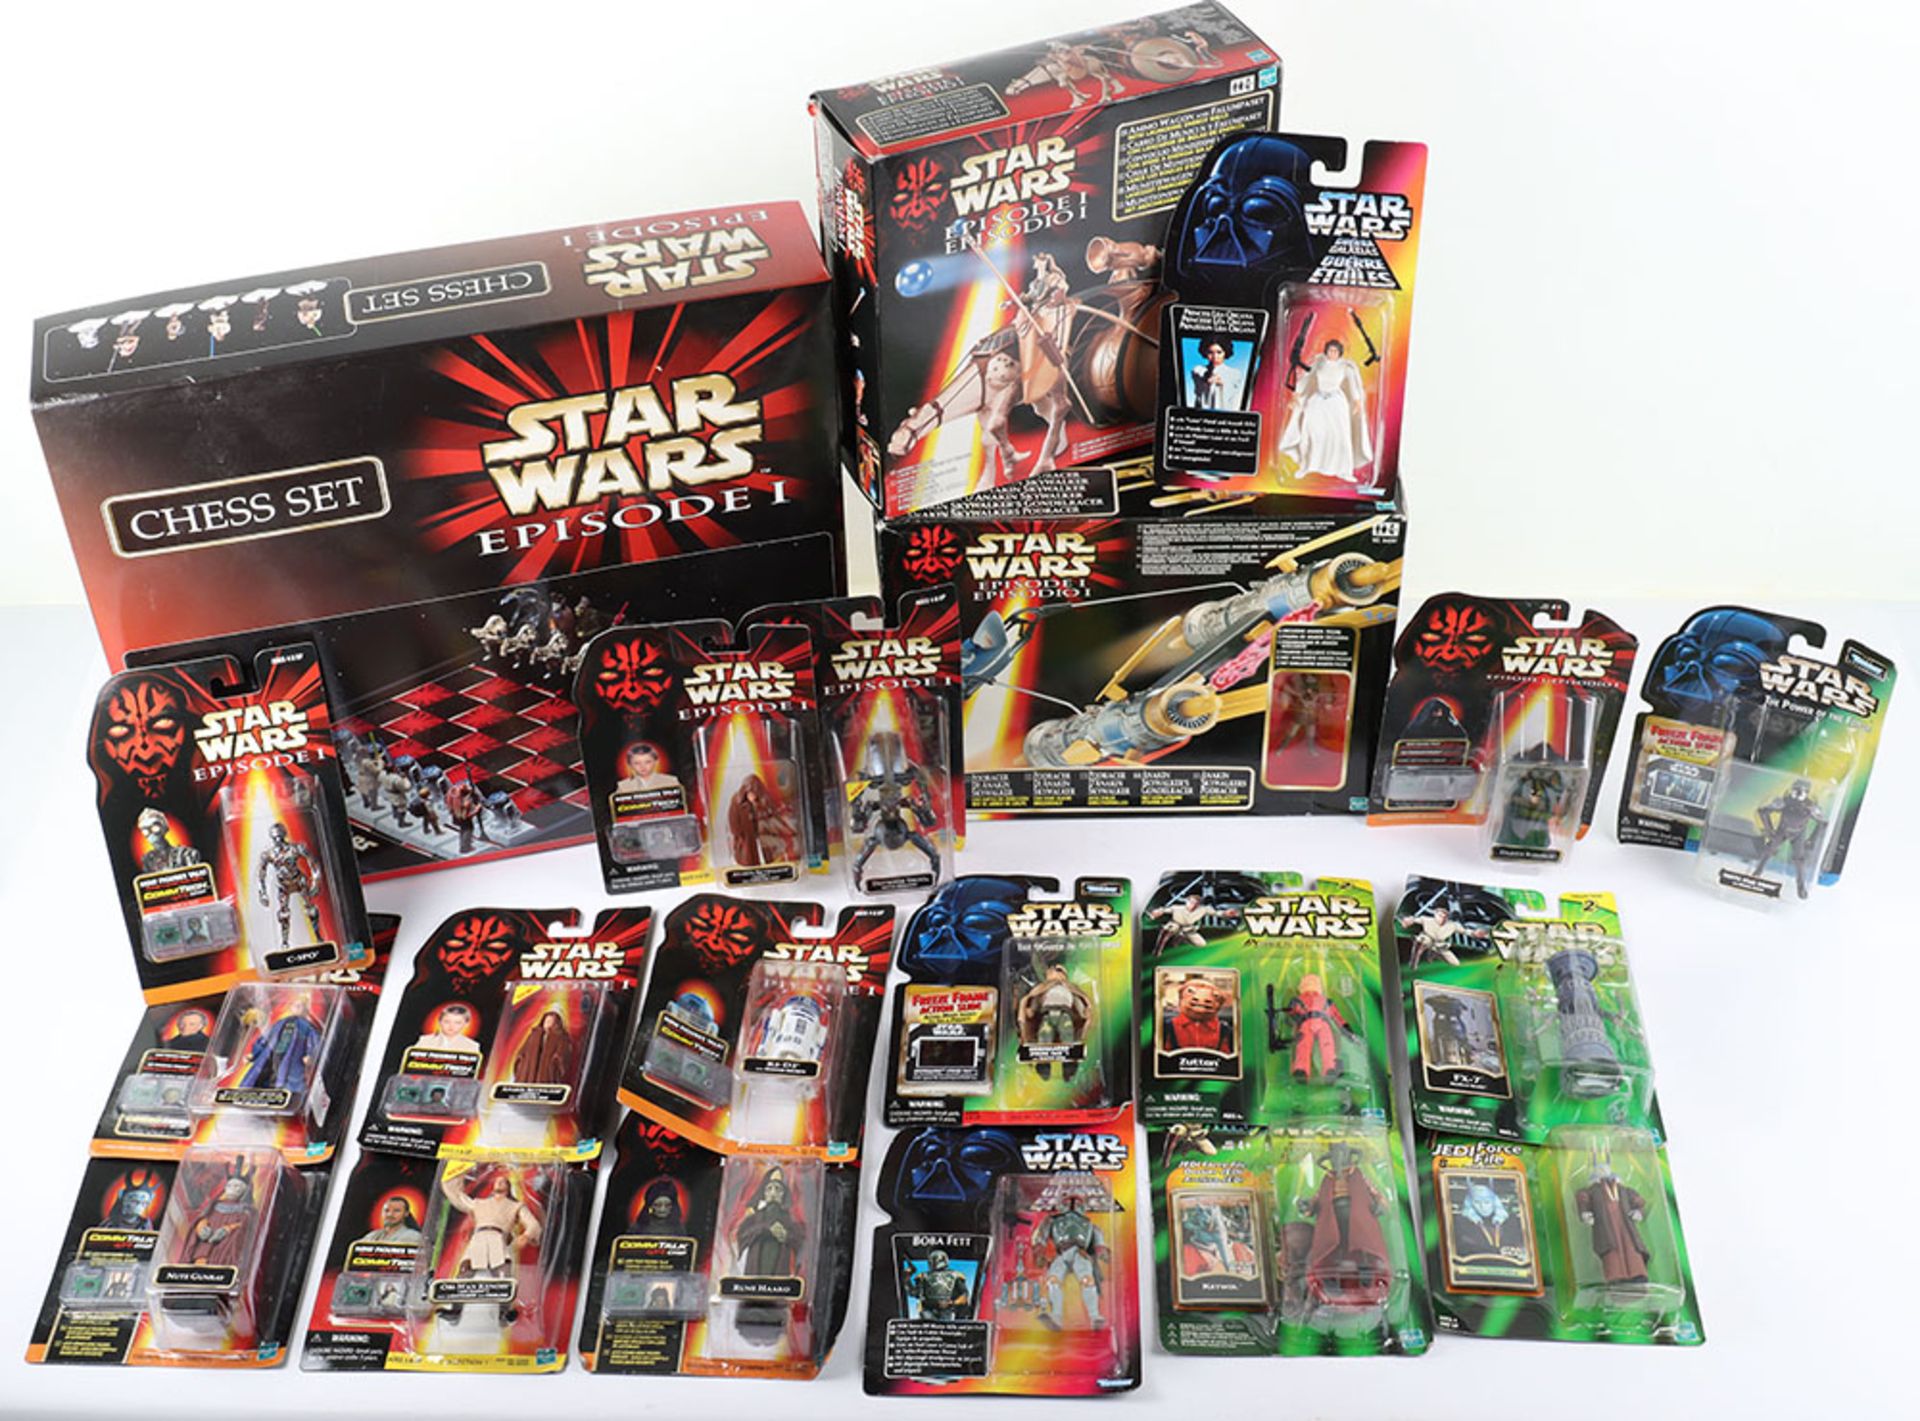 Star Wars Hasbro Episode One boxed and carded figures - Image 2 of 3